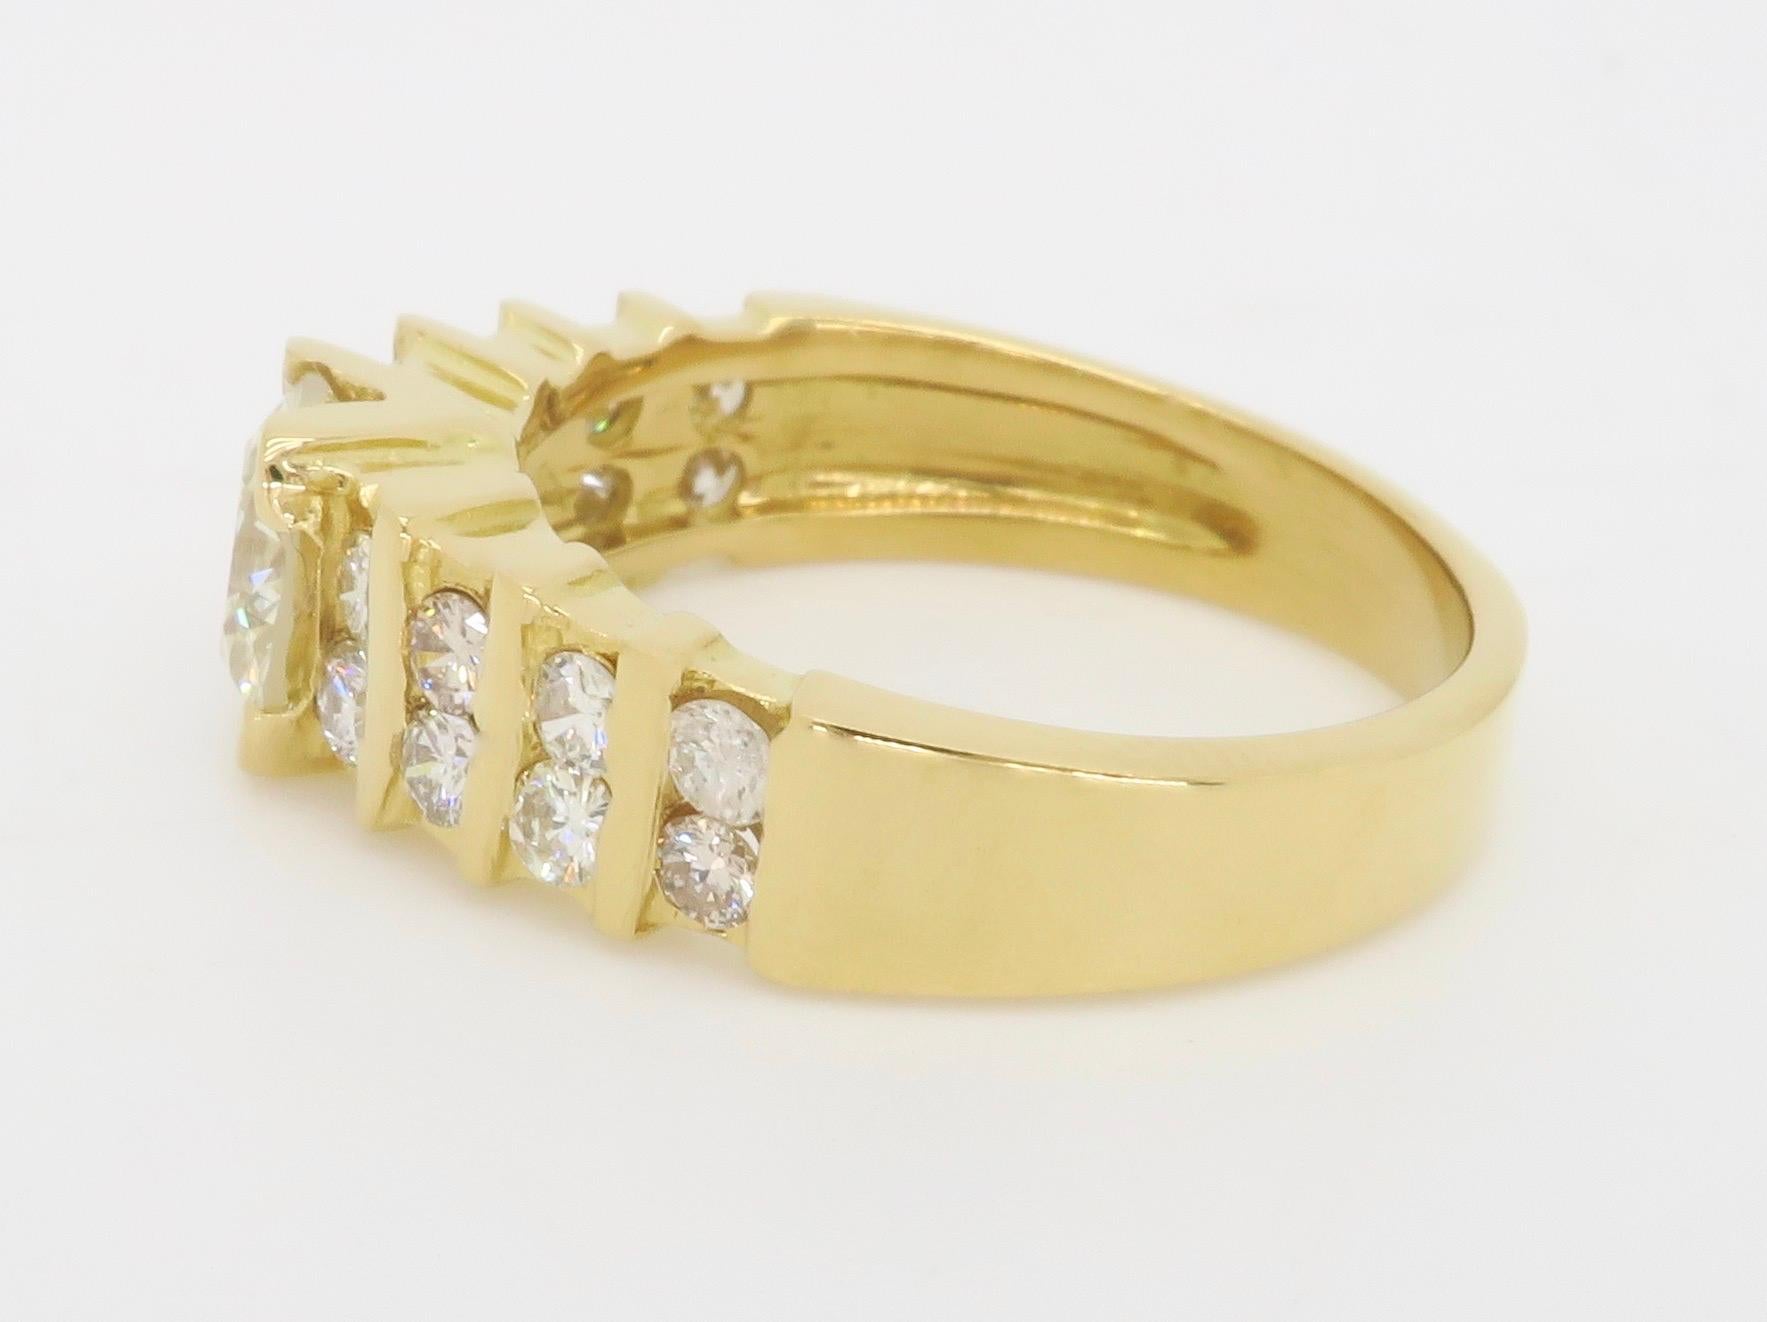 1.54ctw Diamond Encrusted Ring in 14k Yellow Gold For Sale 1